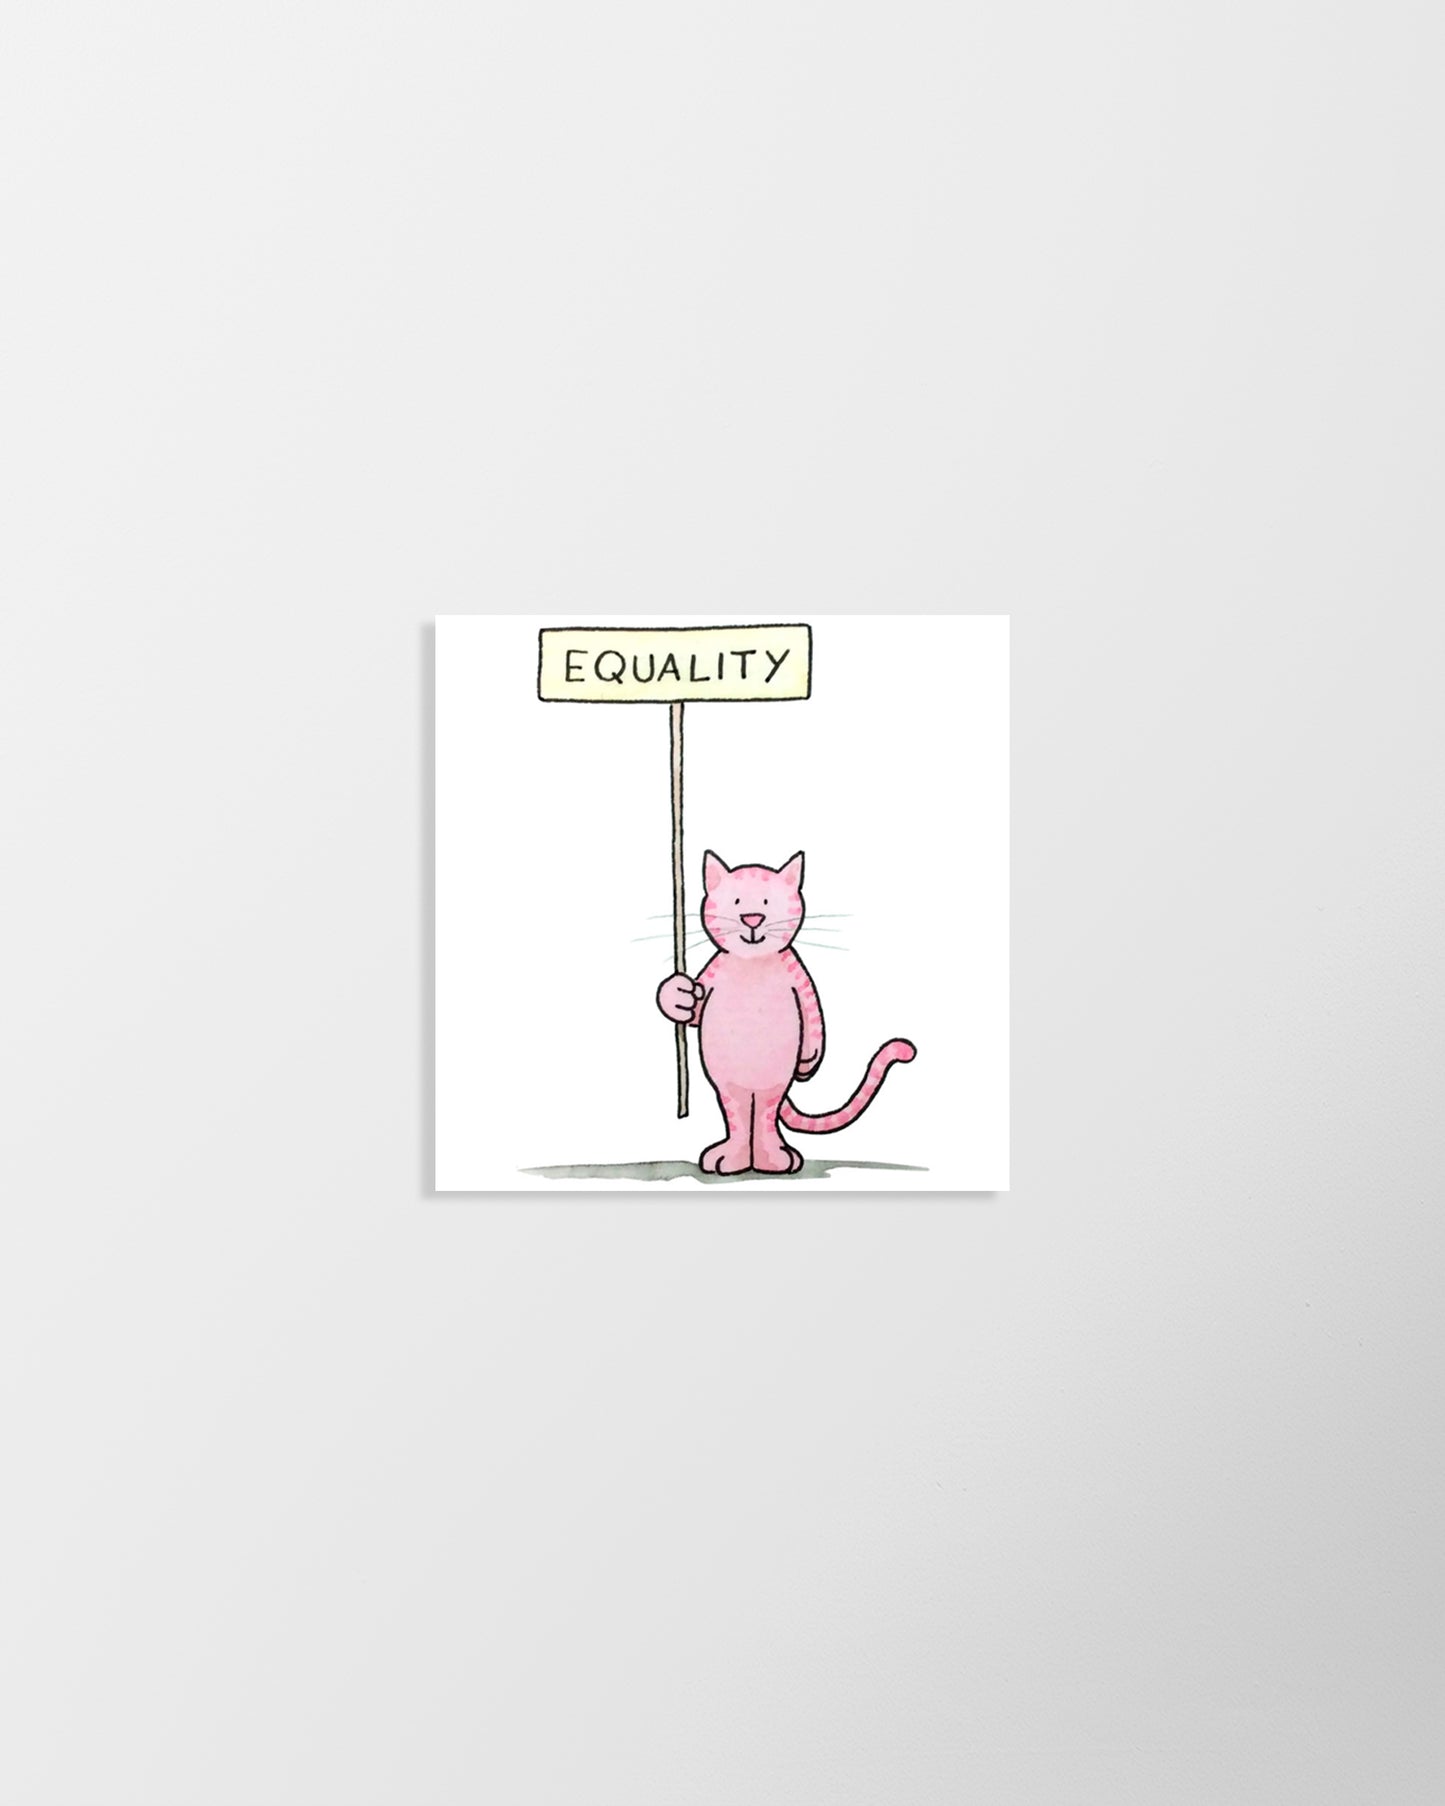 Equality Kitty – signed print by David Hyde Costello